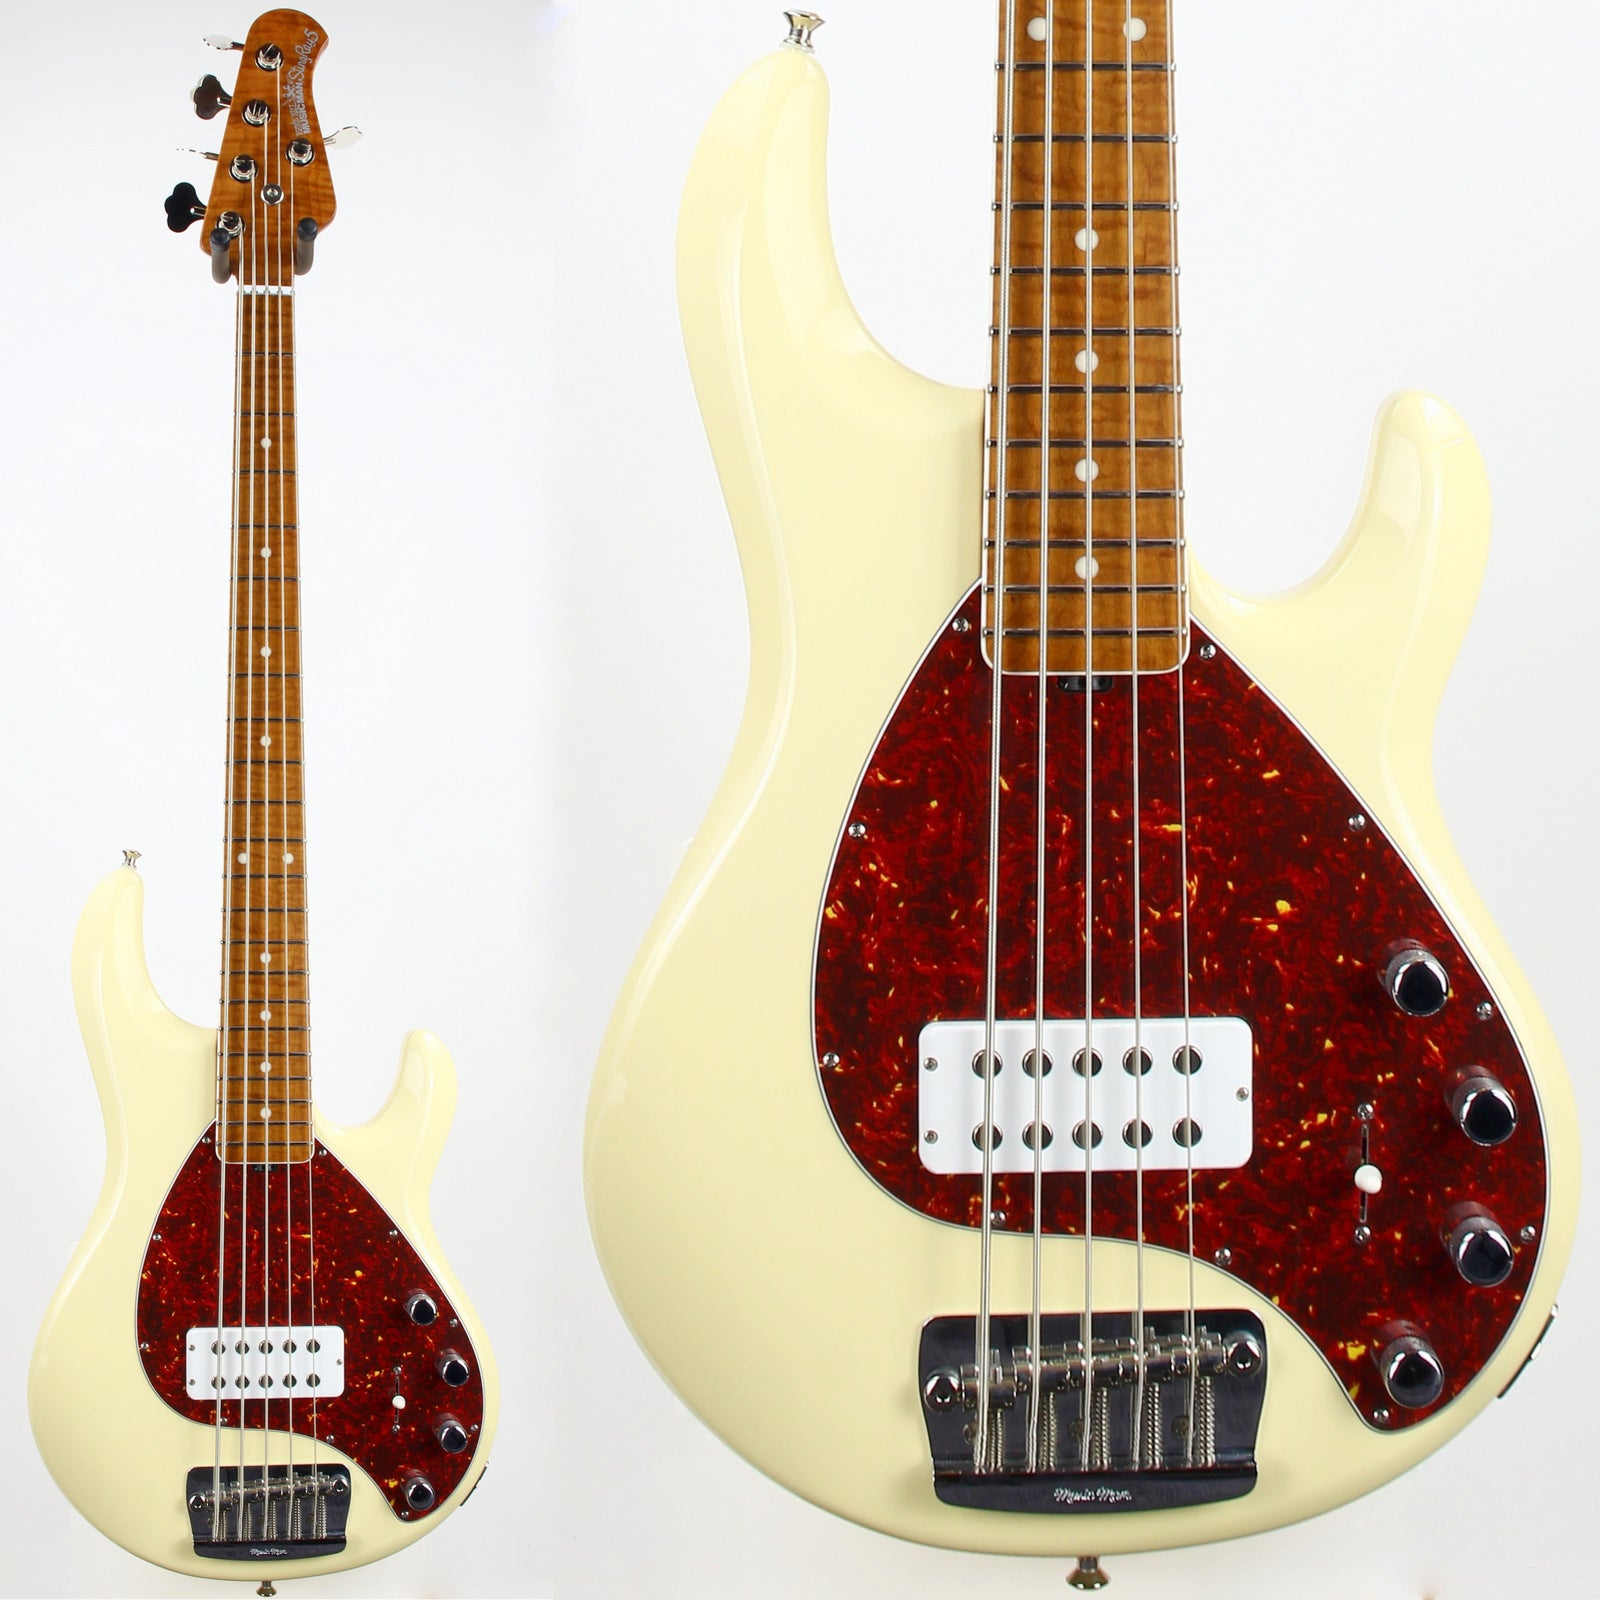 2017 Ernie Ball Music Man 30th Anniversary Stingray 5 Bass Guitar | Limited Edition 5-String | Active Electronics, Roasted Figured Maple Neck